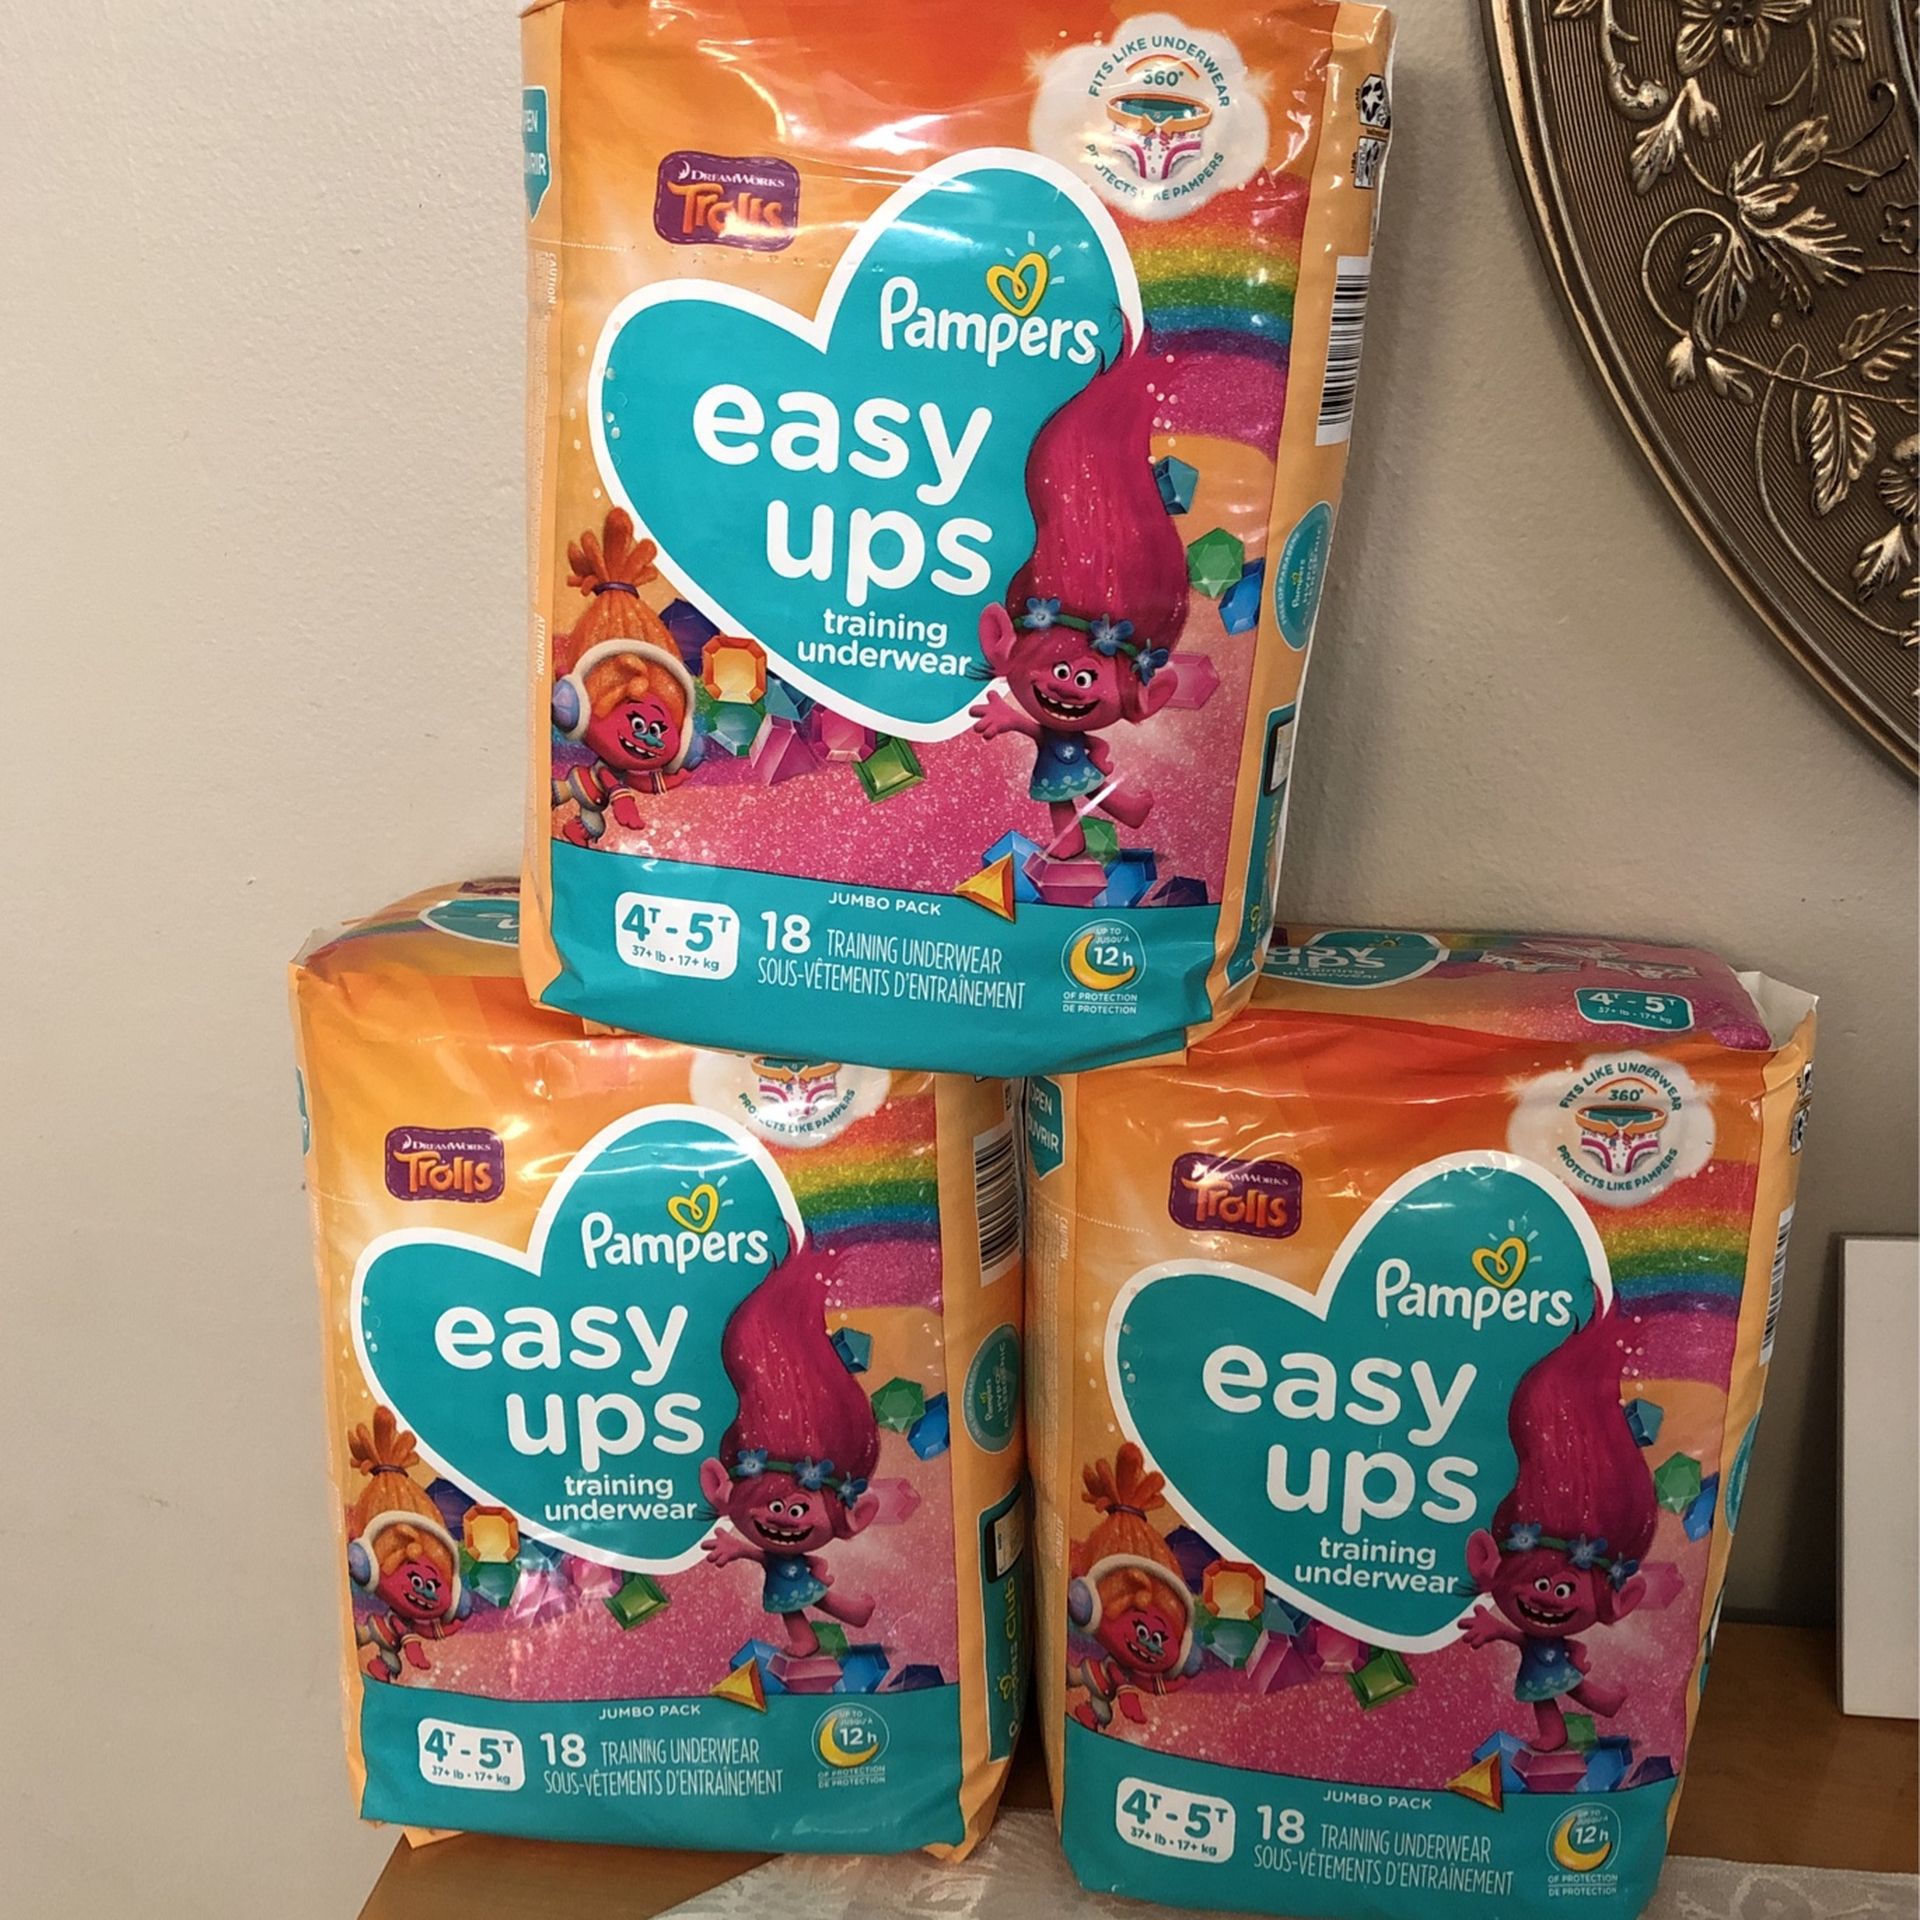 Pampers Easy Ups 4/5